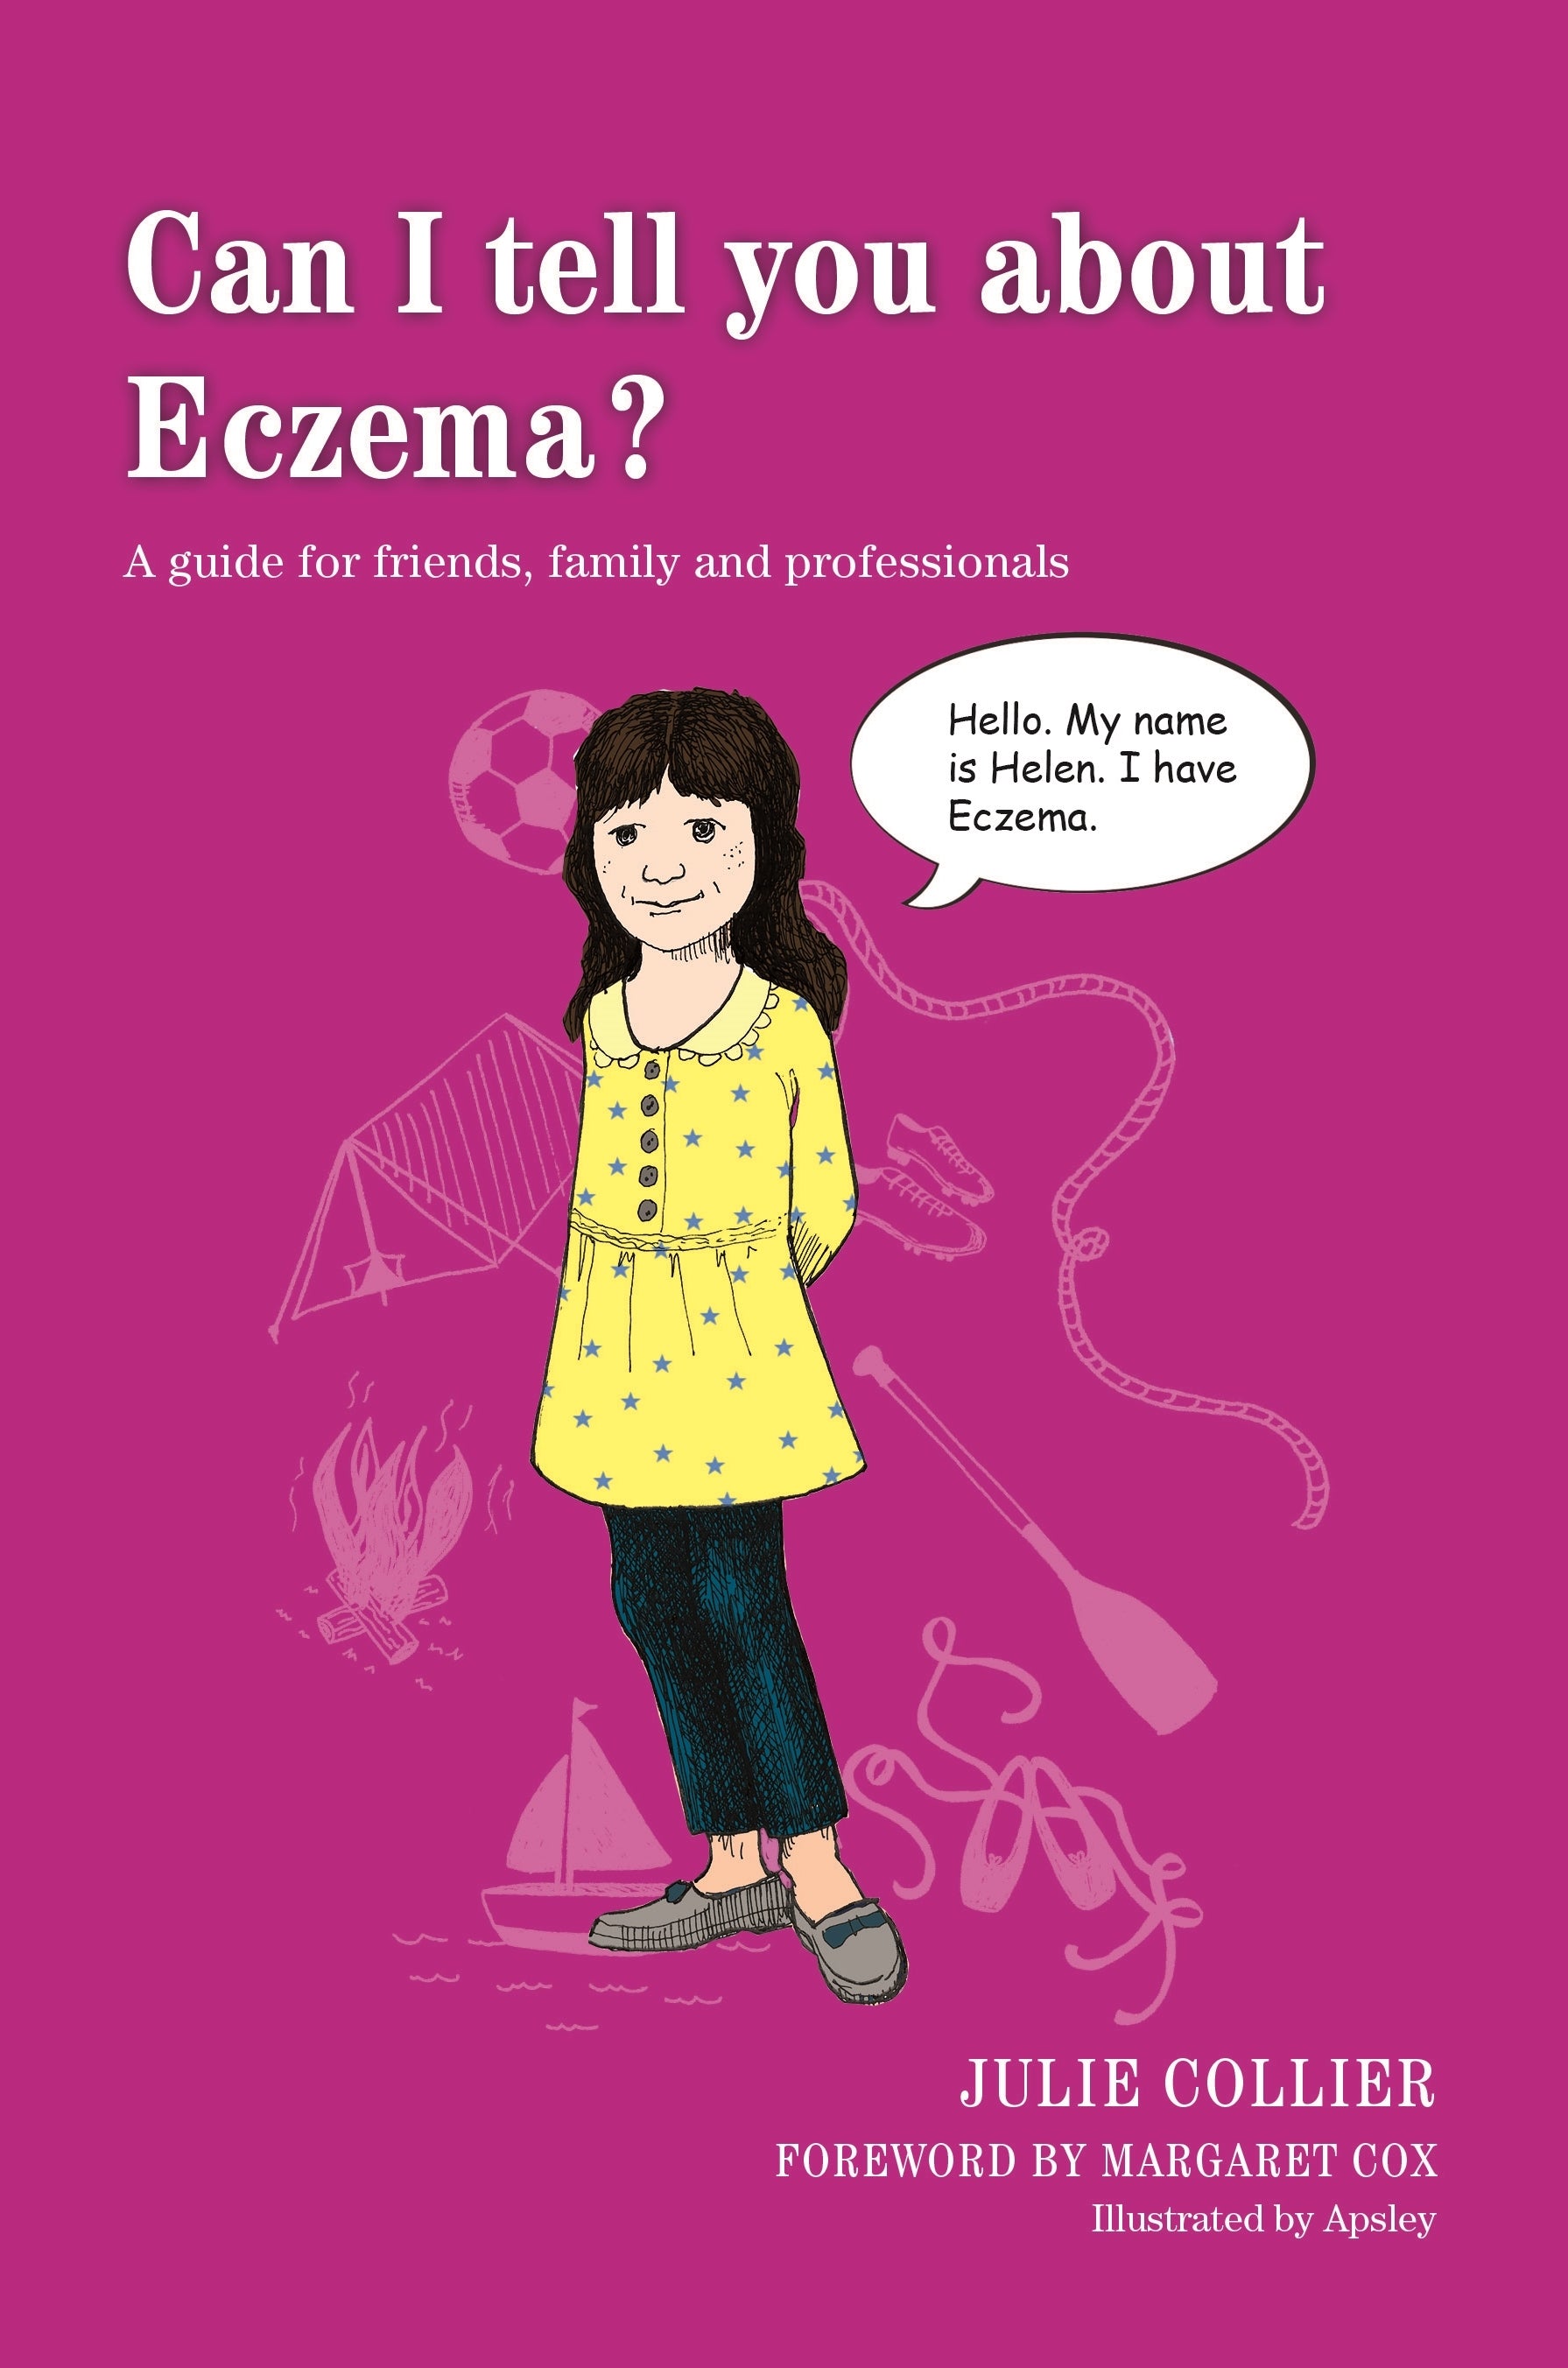 Can I tell you about Eczema? by Margaret Cox,  Apsley, Julie Collier